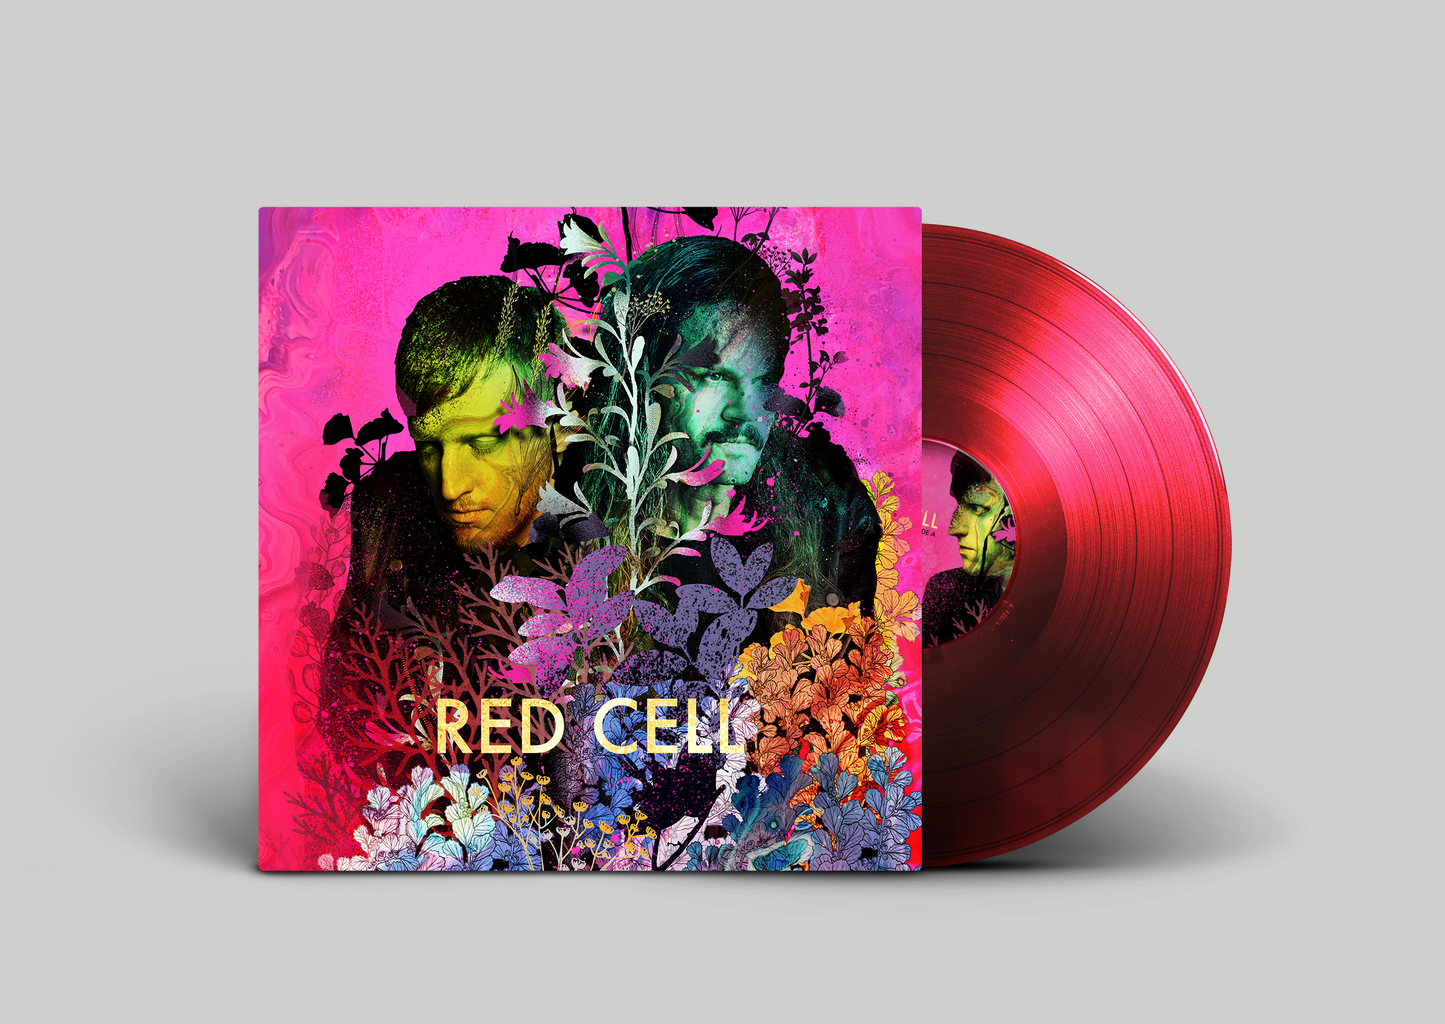 Red Cell - Transparent red vinyl